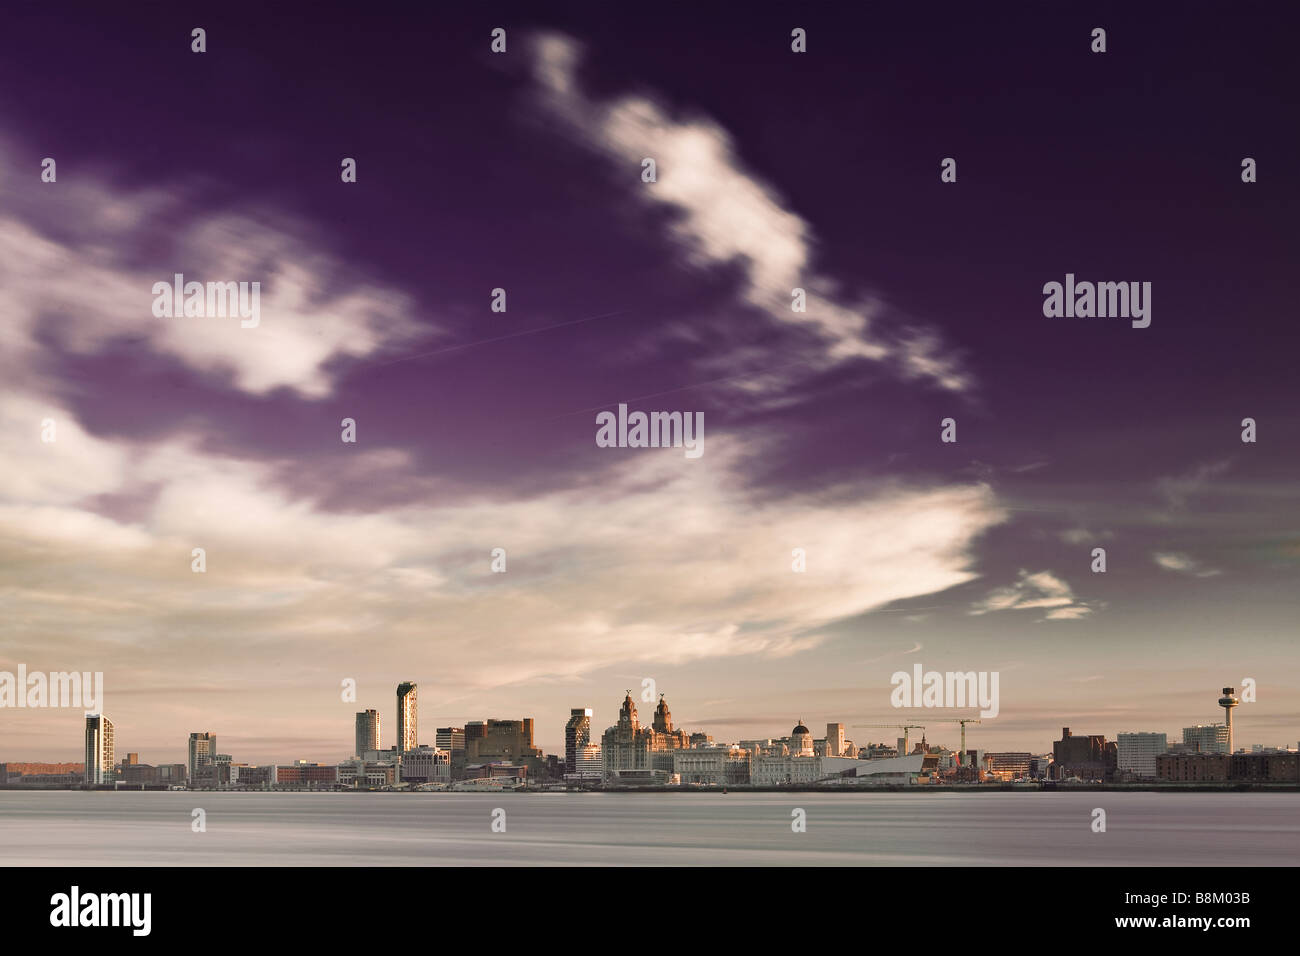 a long exposure image of the famous liverpool waterfront with a dramatic dark dawn or sunset with famous buildings Stock Photo